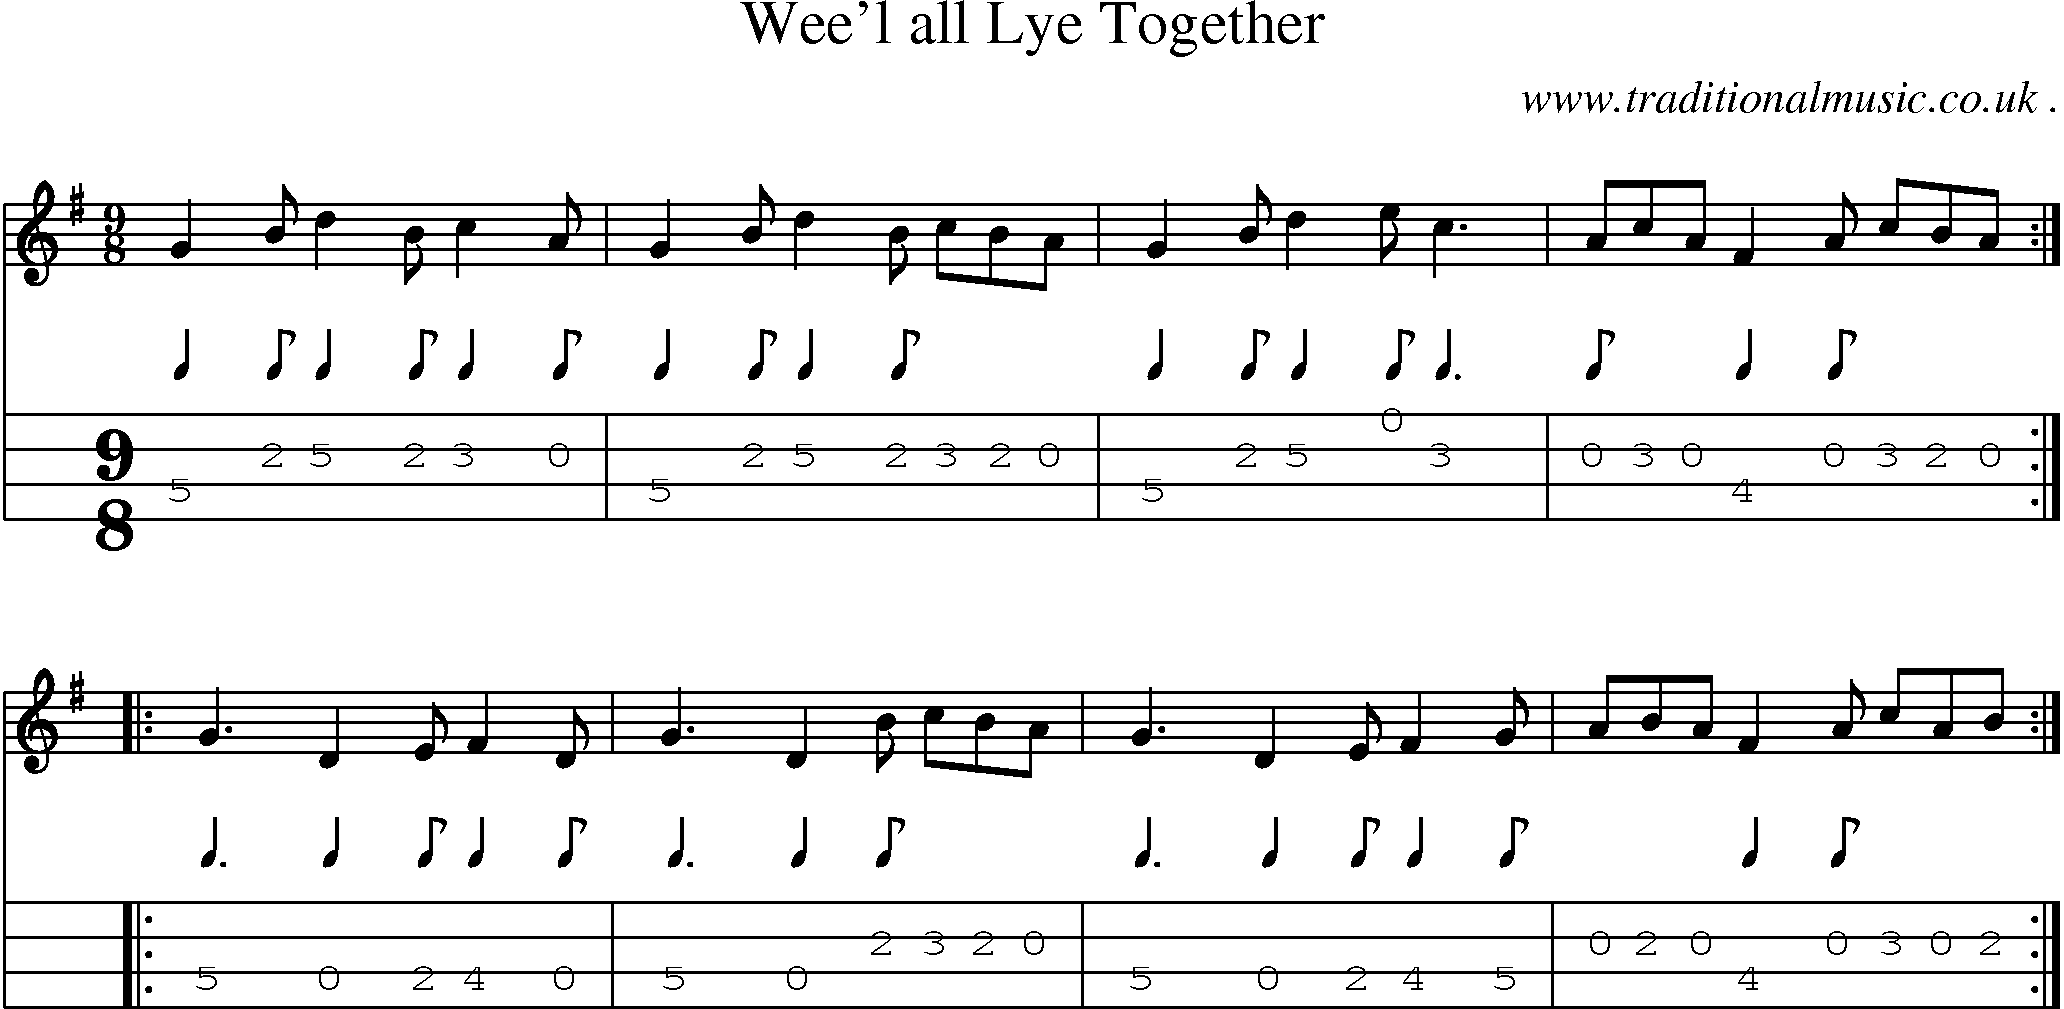 Sheet-Music and Mandolin Tabs for Weel All Lye Together